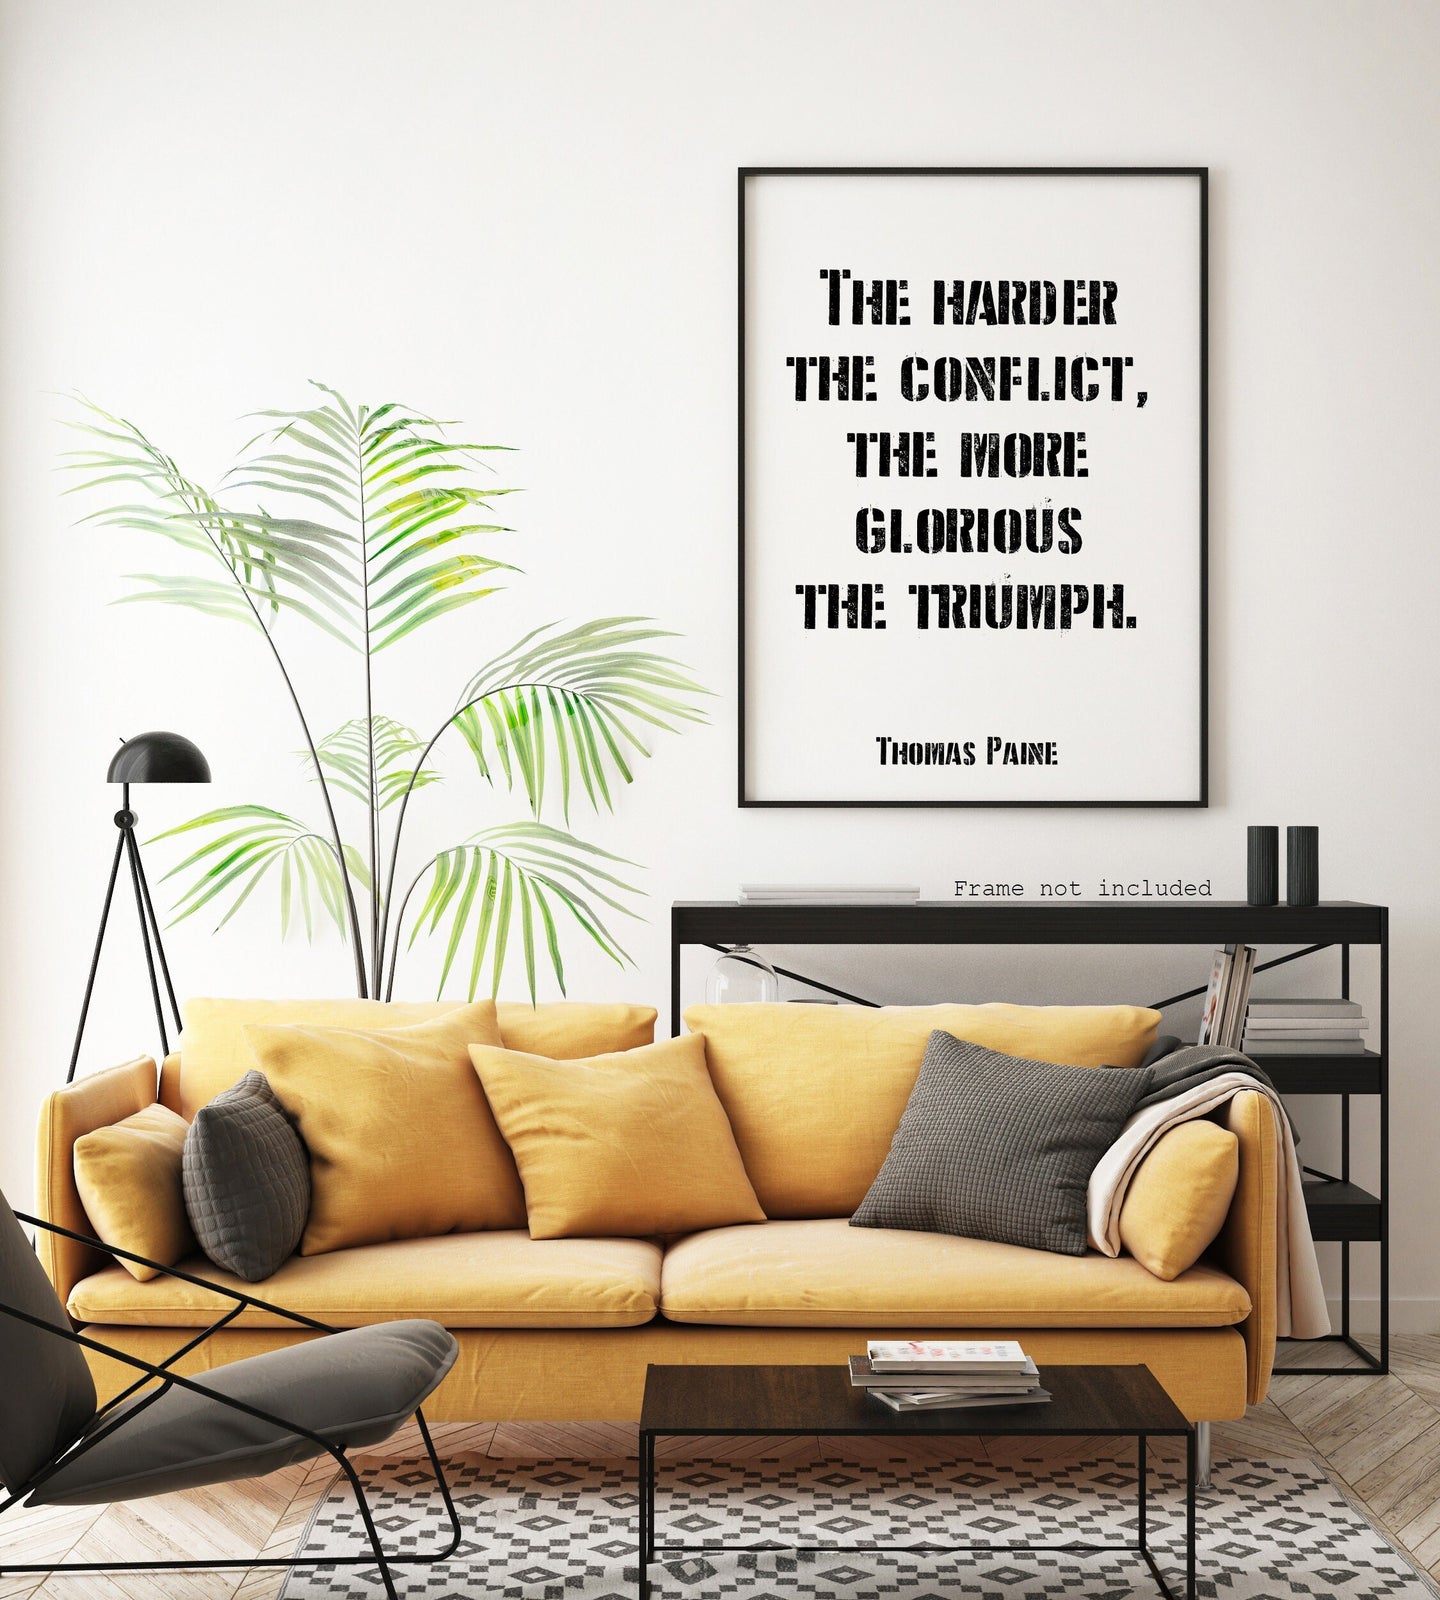 Thomas Paine quote - The harder the conflict, the more glorious the triumph. - Office Wall art - UNFRAMED